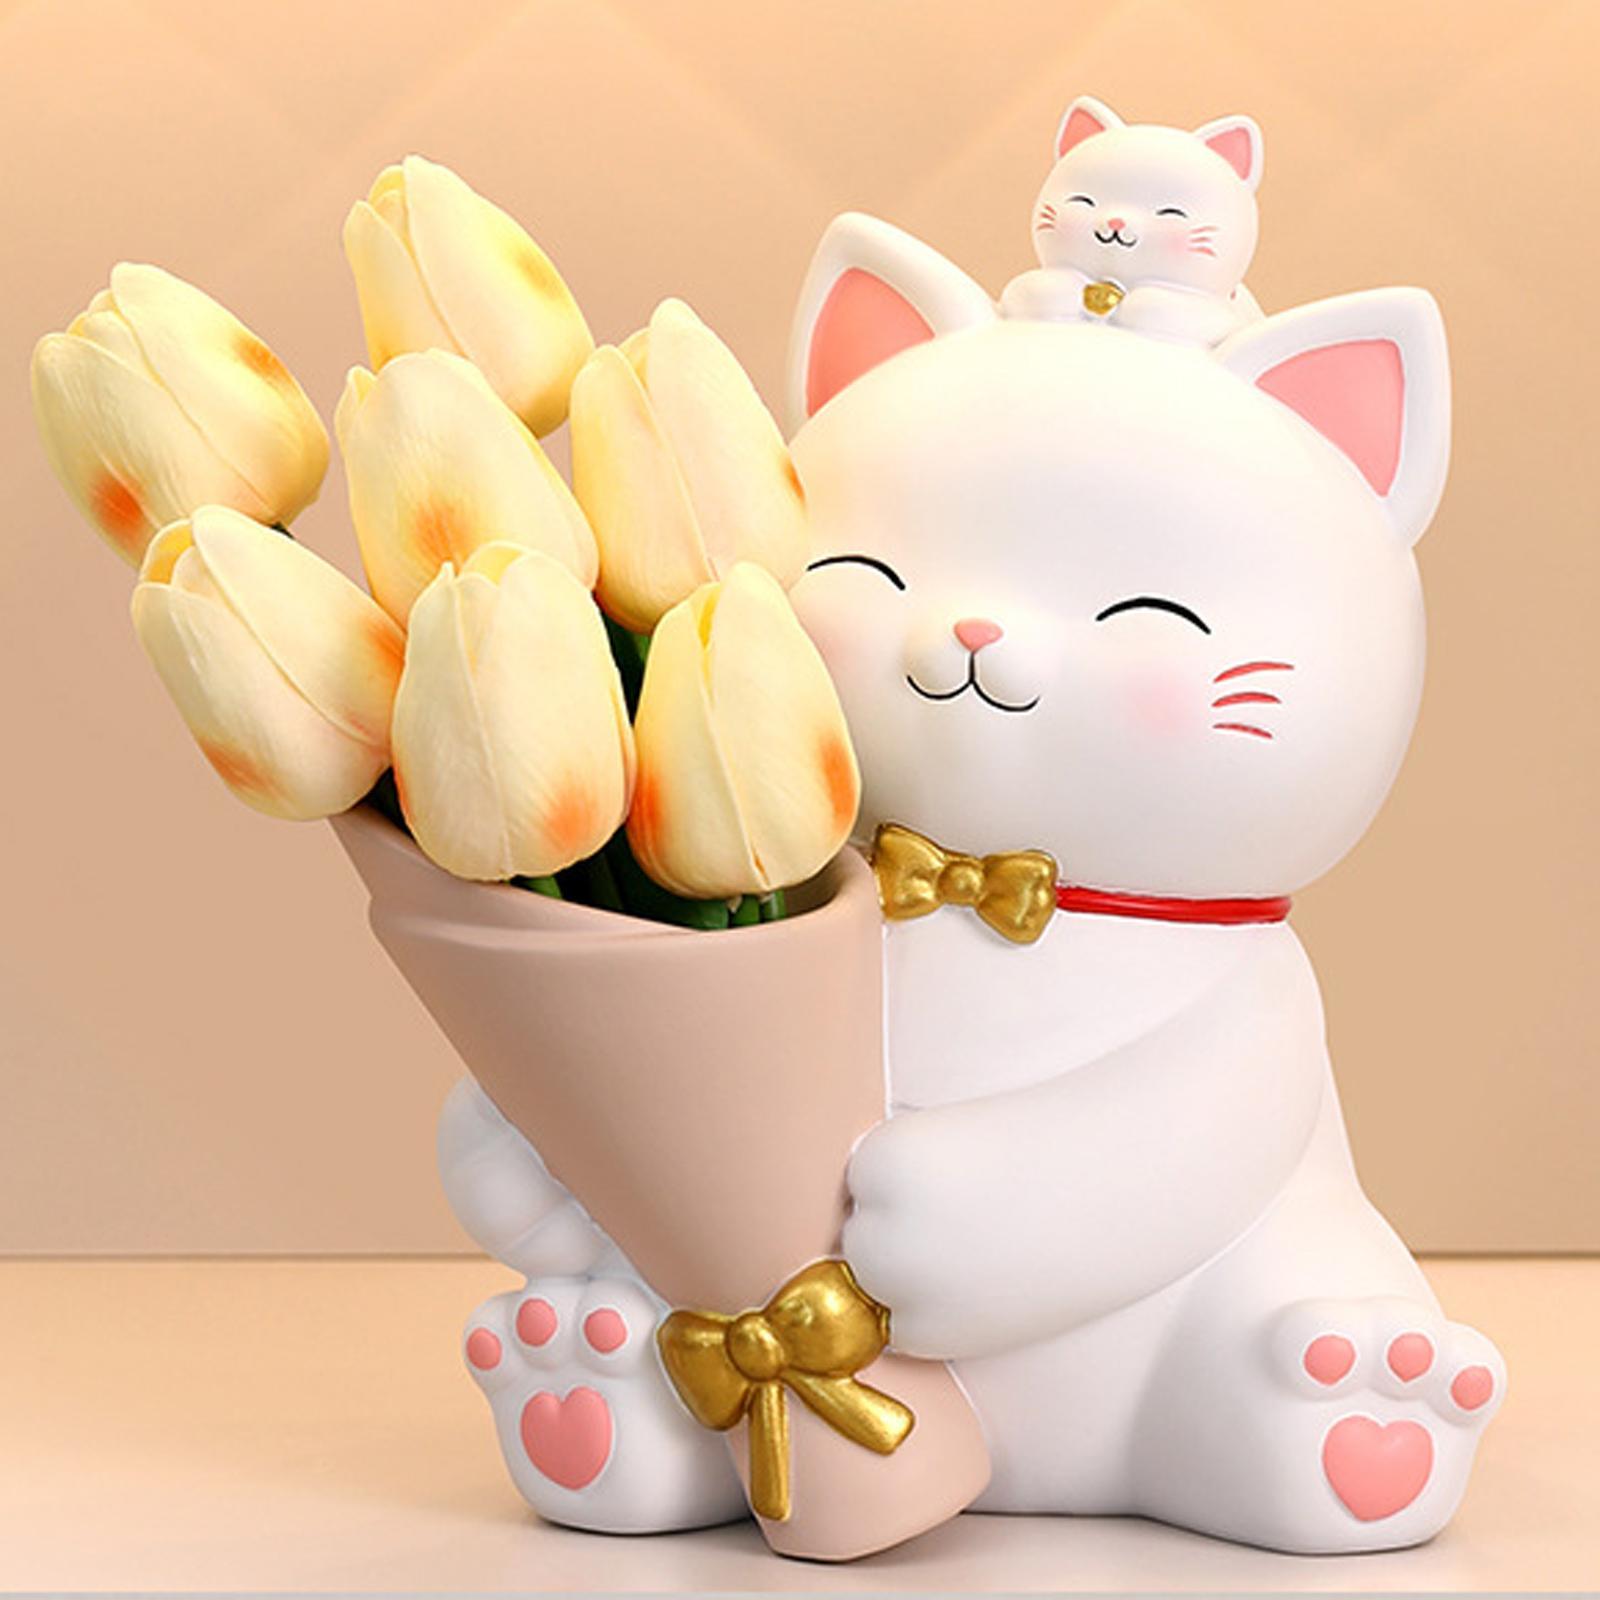 Minimalist Resin Cat Statue Figurines Planters Flower Pot Home Holder Flowers Vase for Housewarming Party Living Room Ornaments Wedding